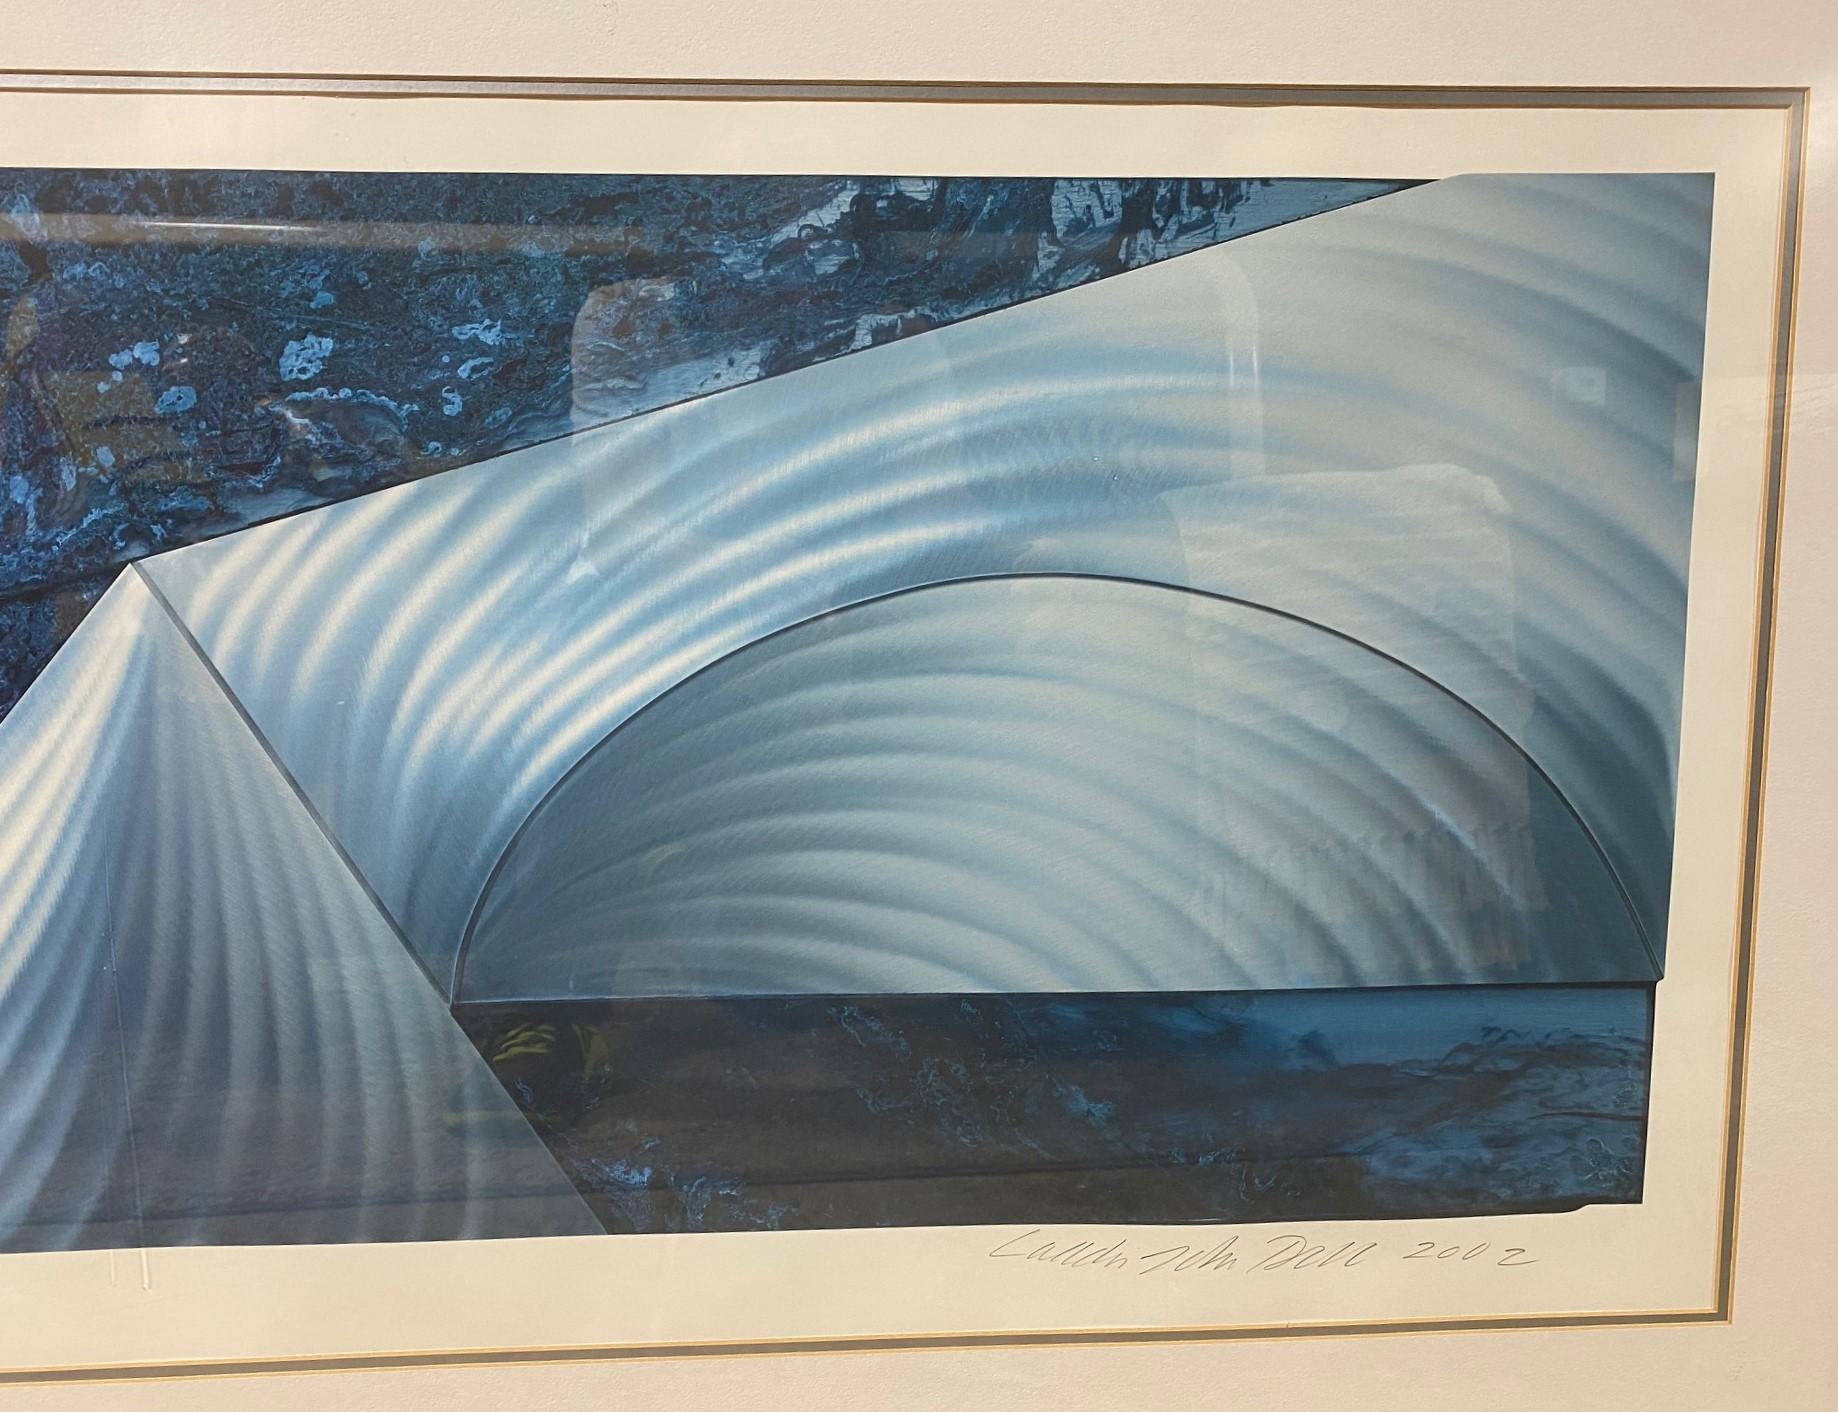 Modern Laddie John Dill Signed California Artist Limited Edition Large Lithograph Print For Sale